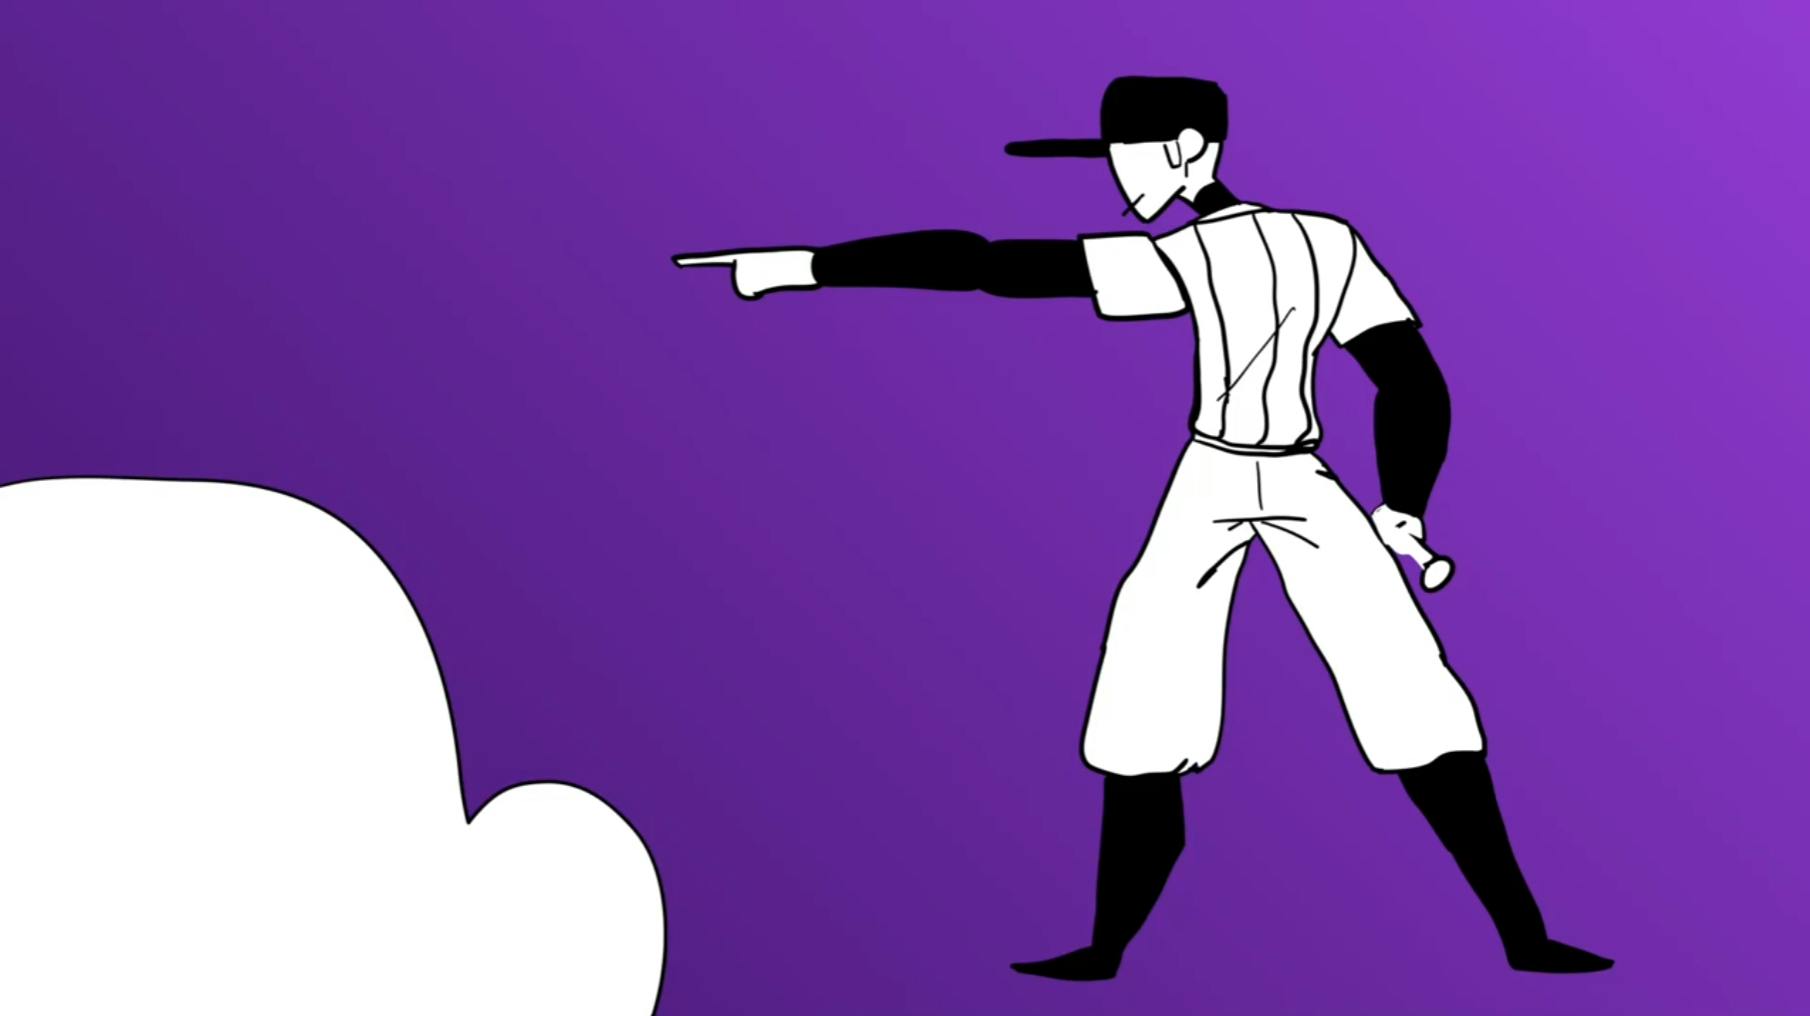 background is purple, and a drawn character in a baseball outfit is pointing to the left. A silhouette of a person is in the foreground in the bottom left